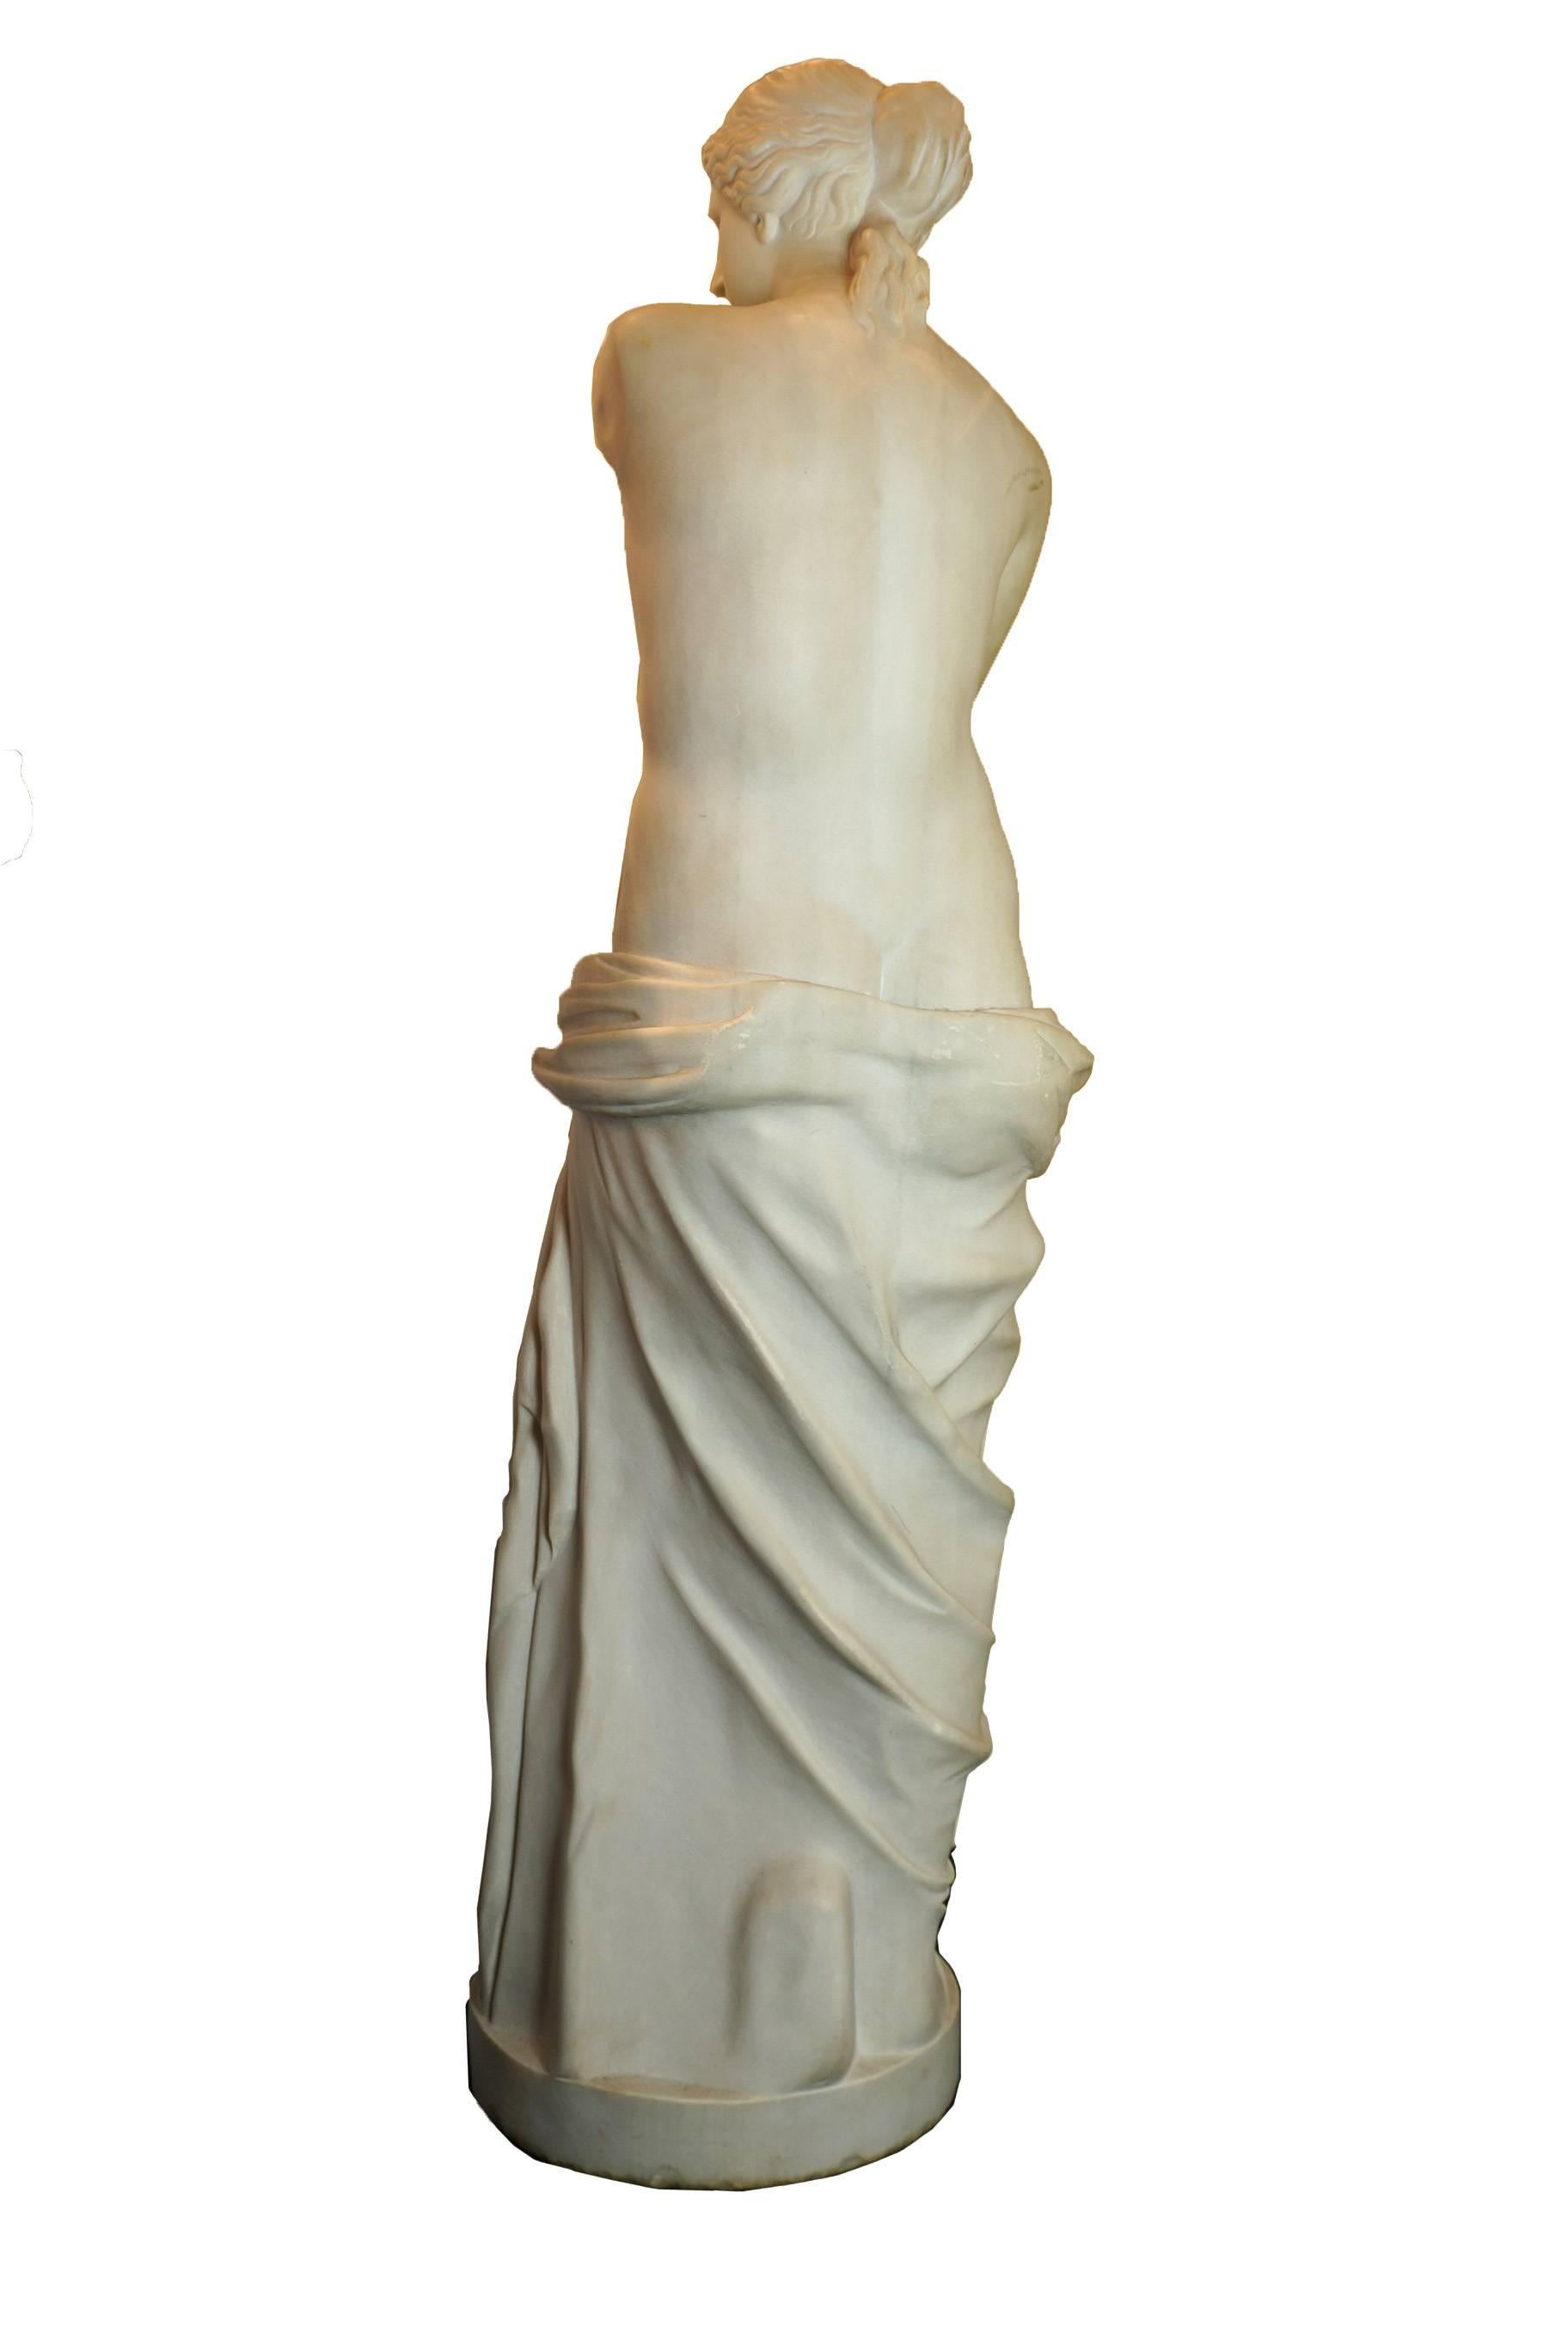 Carved Italian white marble figure of a neoclassical standing nude robed on the bottom part of her body.
Apparently unsigned.
Stock Number: SC108